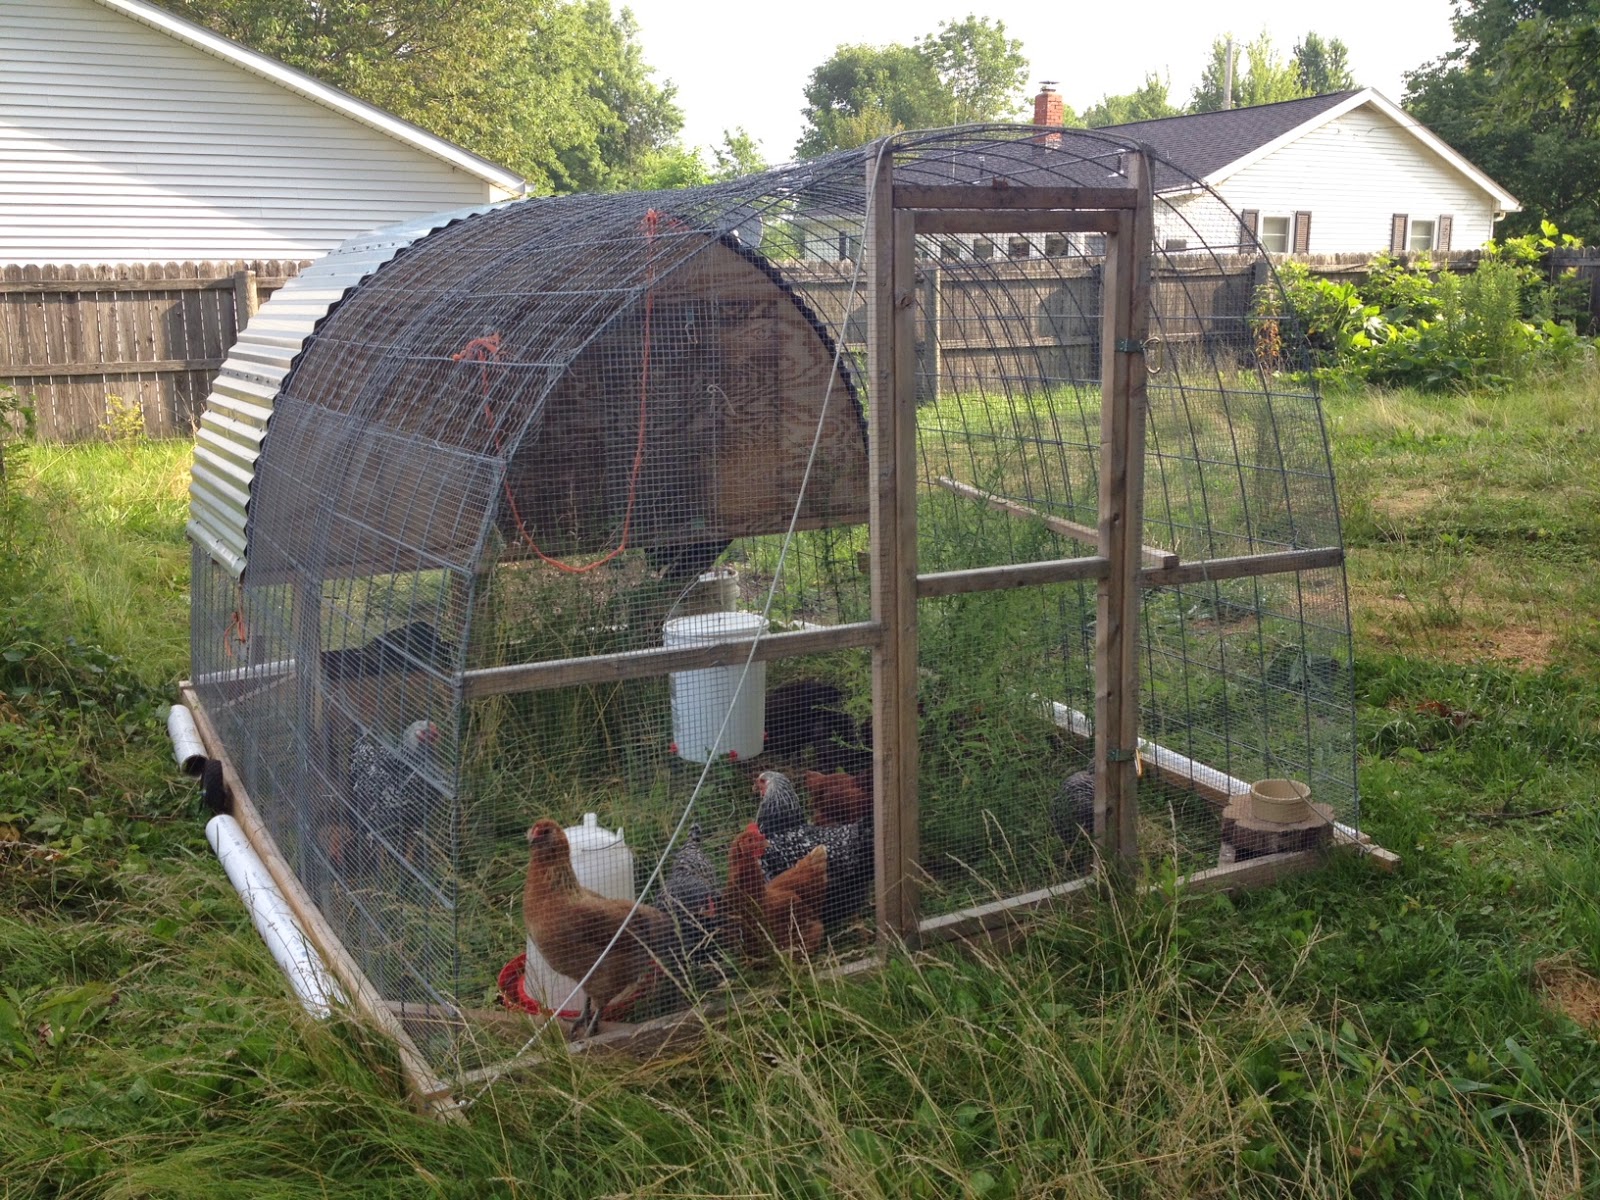 Chicken "tractor" (now stationary coop)